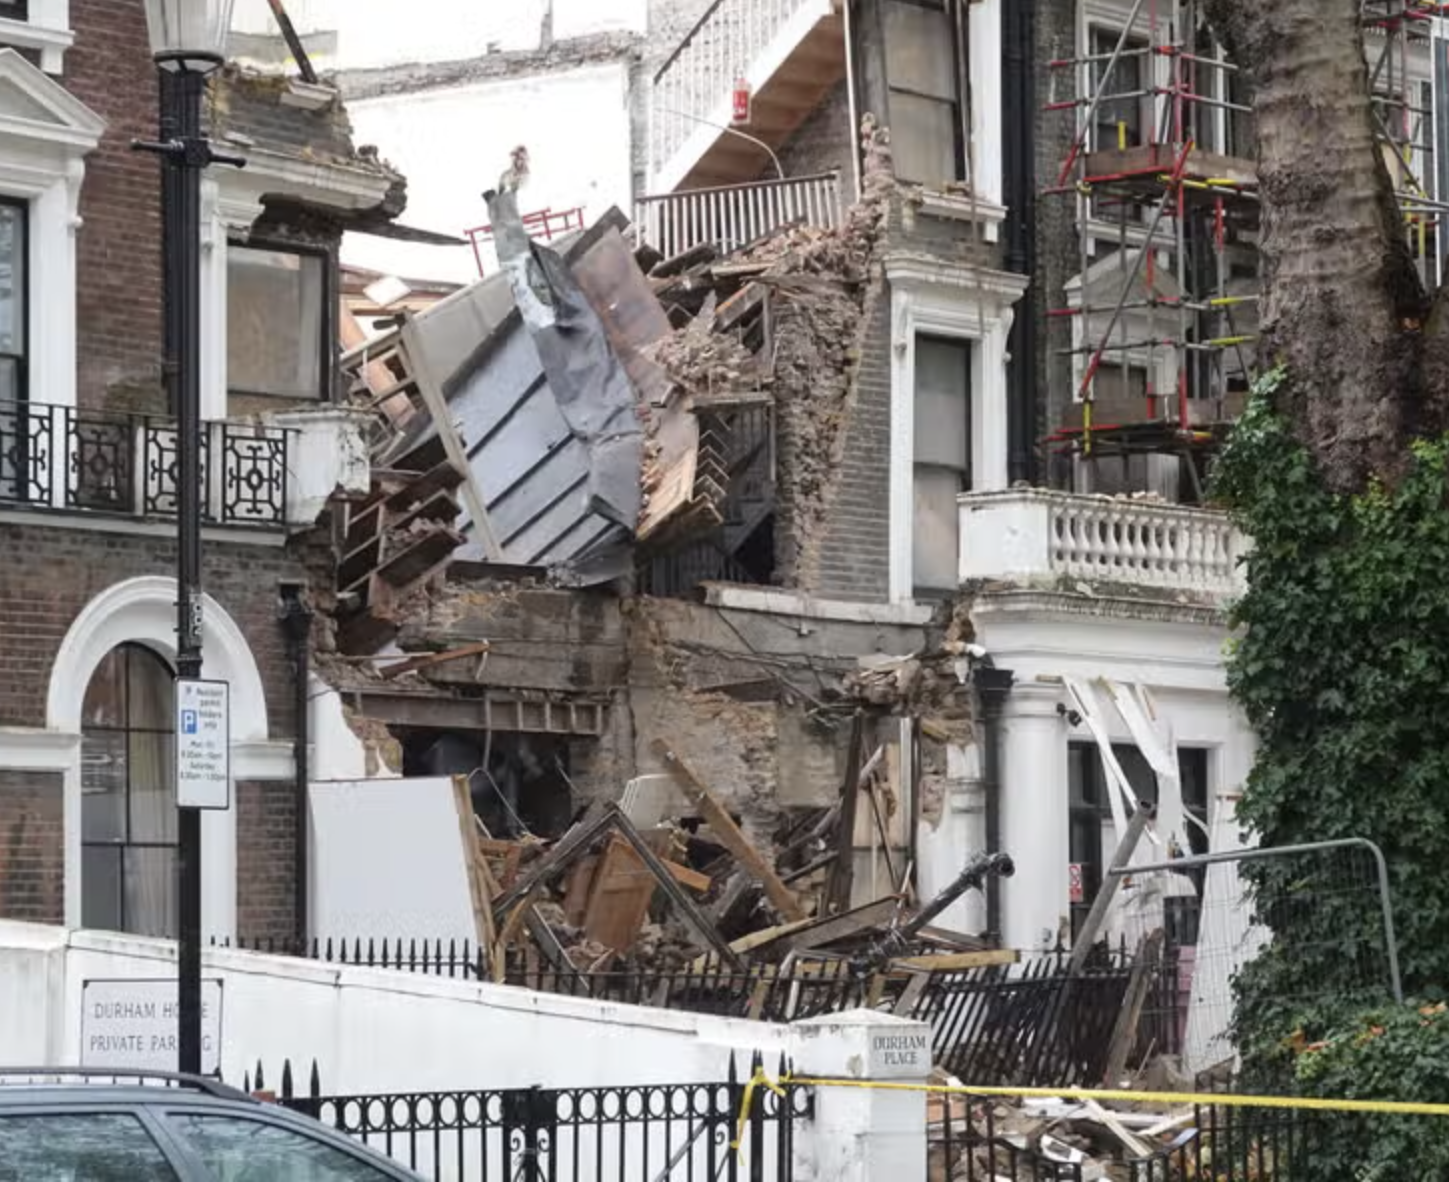 The London Bridge isn’t the only structure that’s come crashing down in the British capital. Back in 2020, 40 people were forced to evacuate their homes in West London after two terraces appeared to split the historic property from roof to street level. No one sustained any injuries in the collapse. 